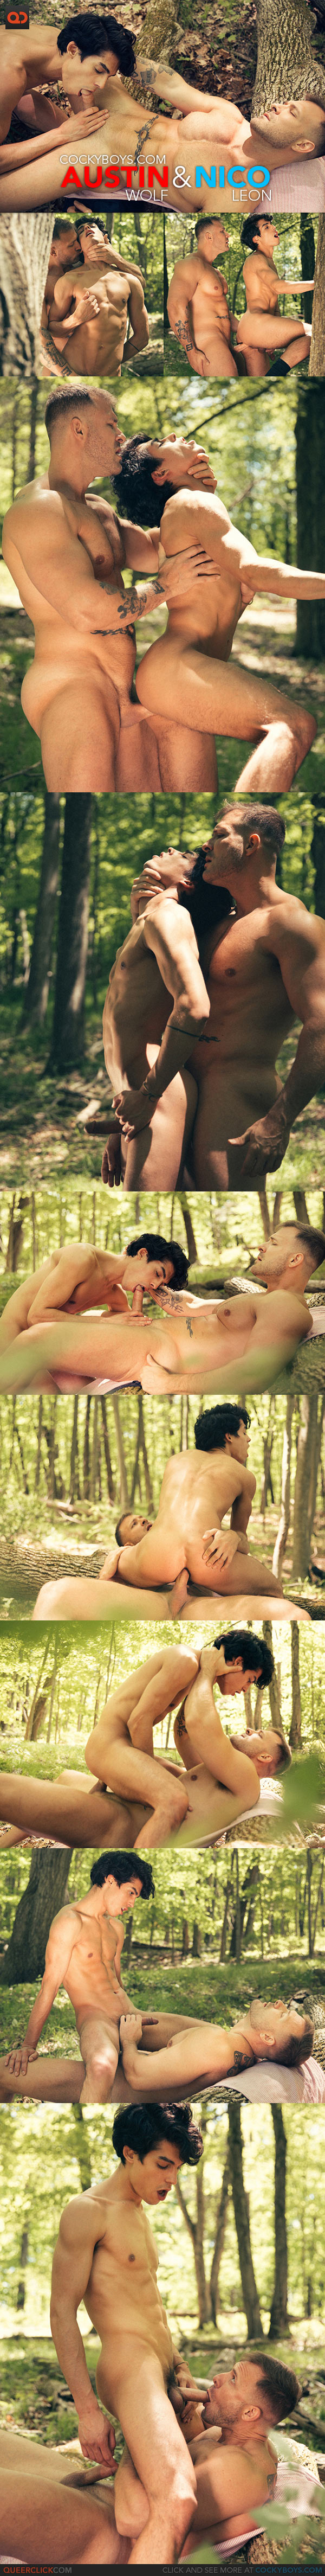 CockyBoys: Austin Wolf And Nico Leon Sizzle In The Woods